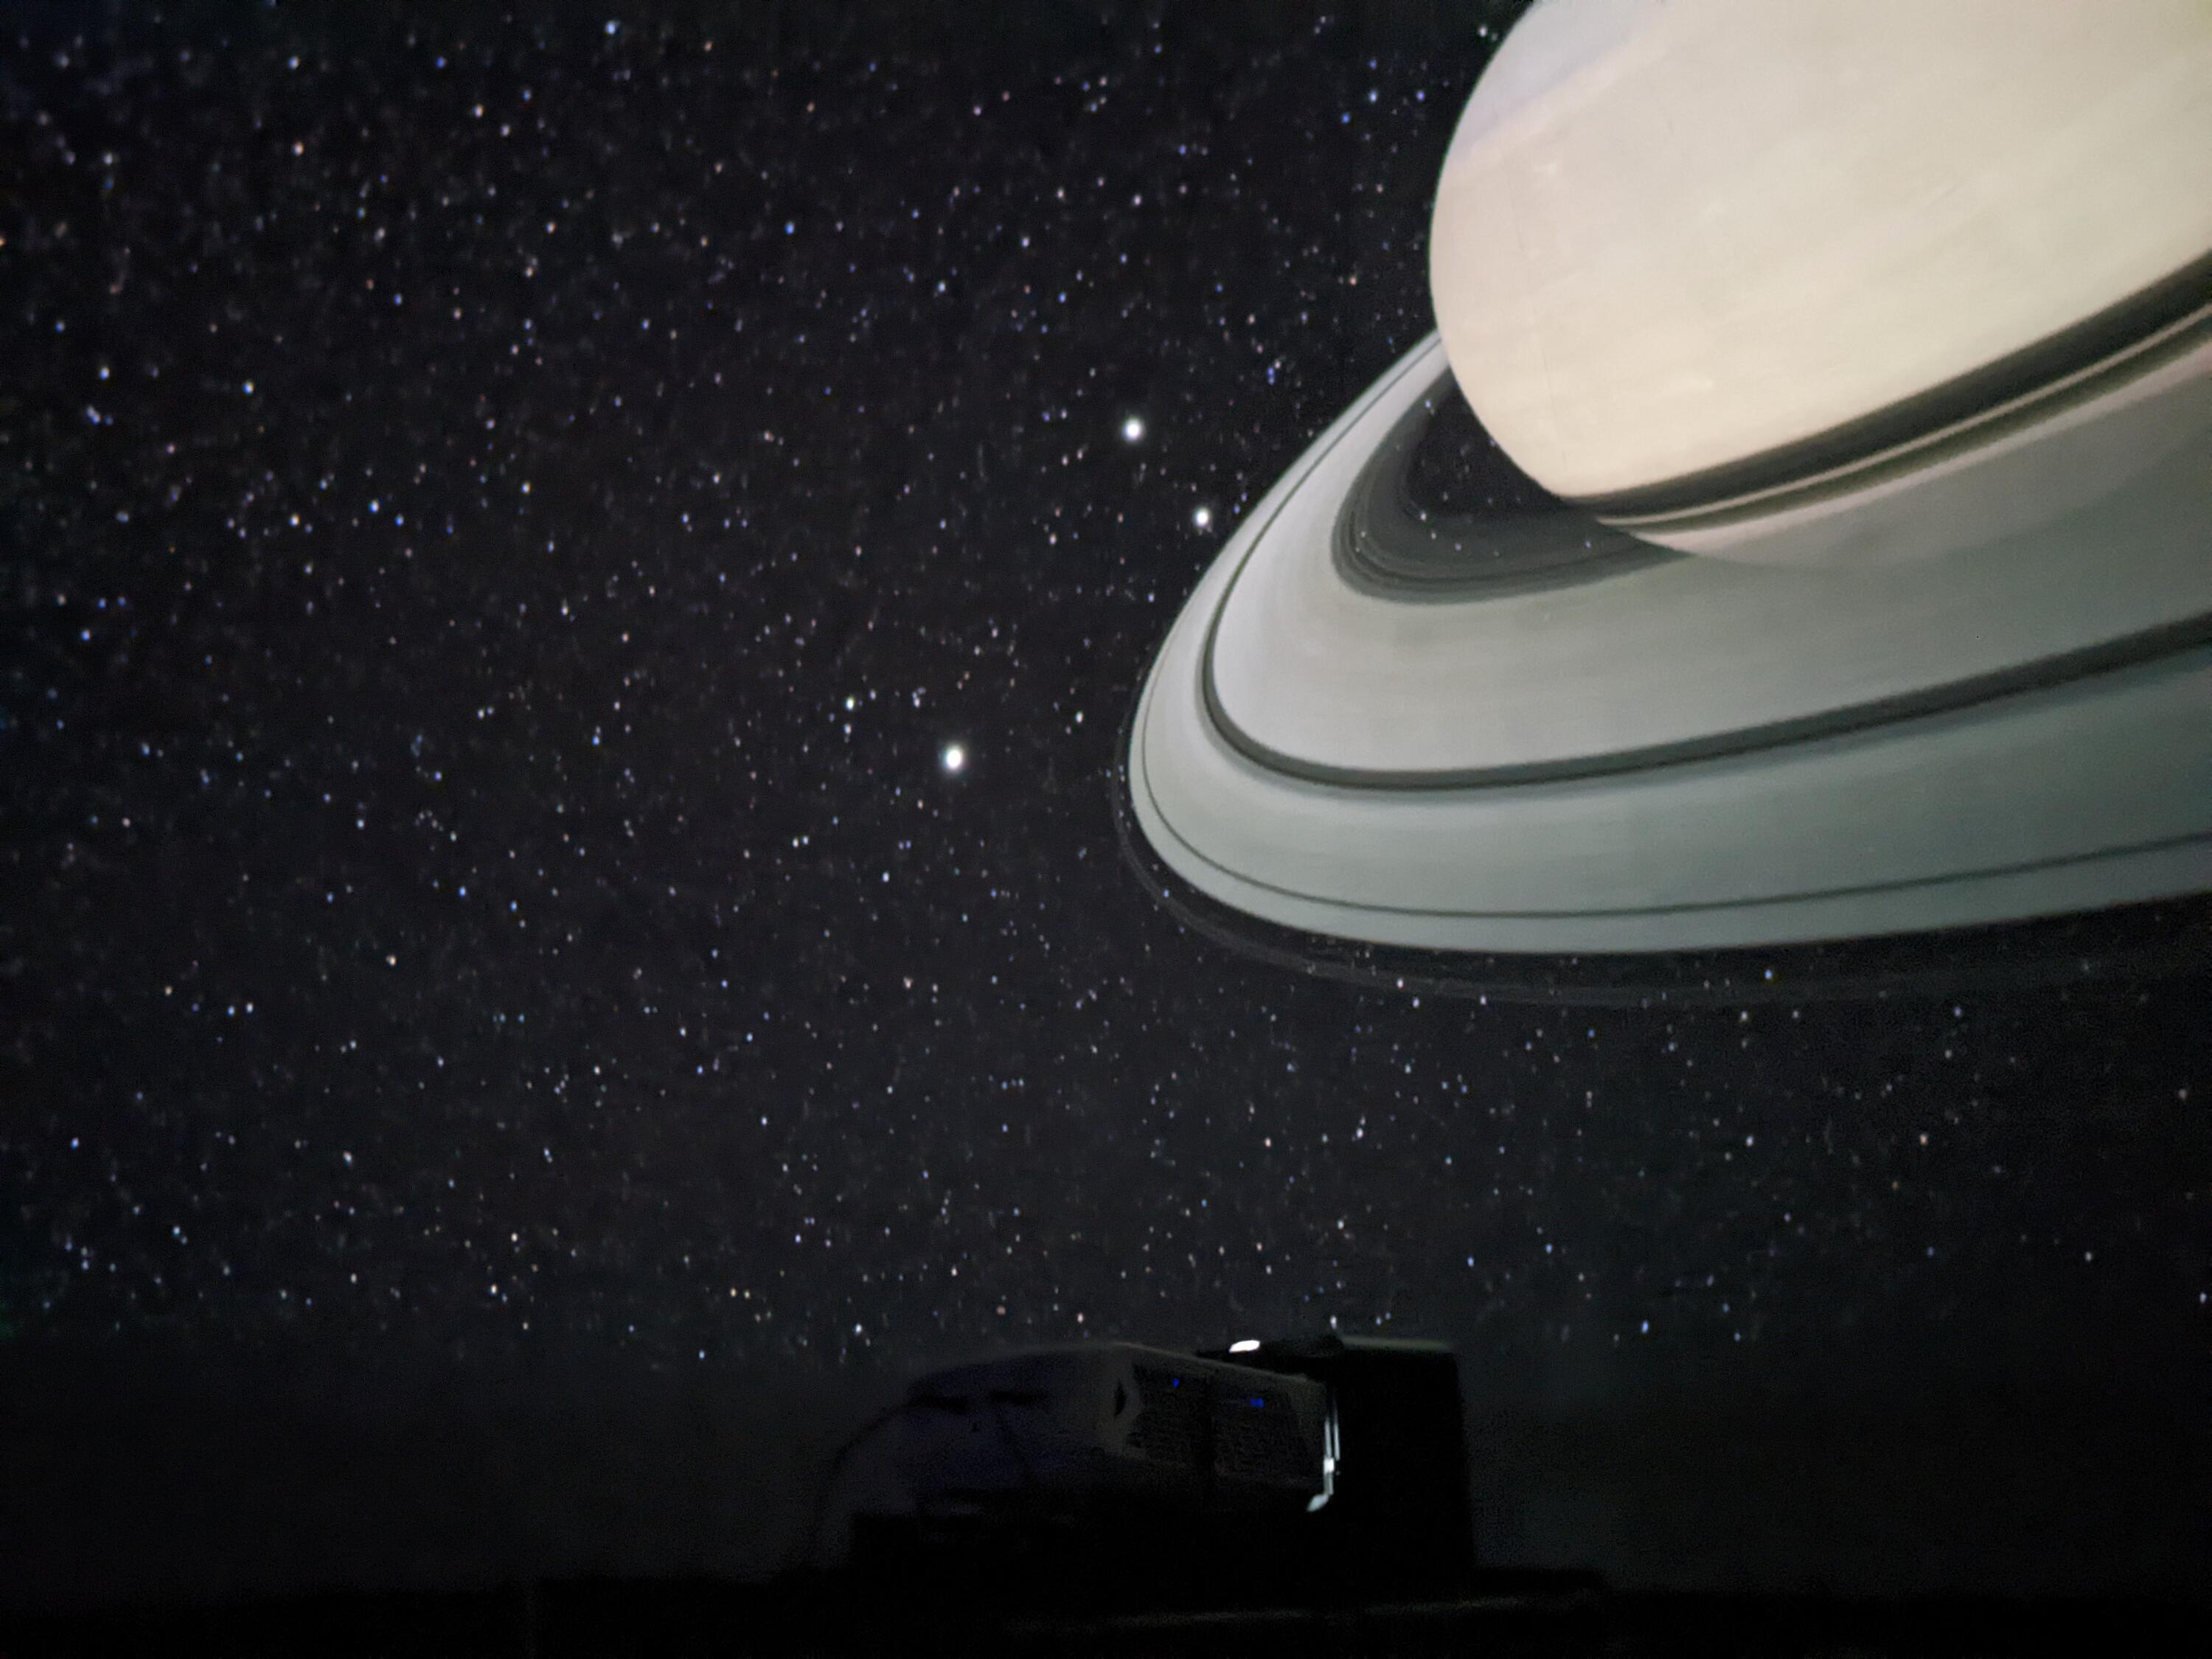 Photograph of Saturn projected on inside of the Astro-Bubble